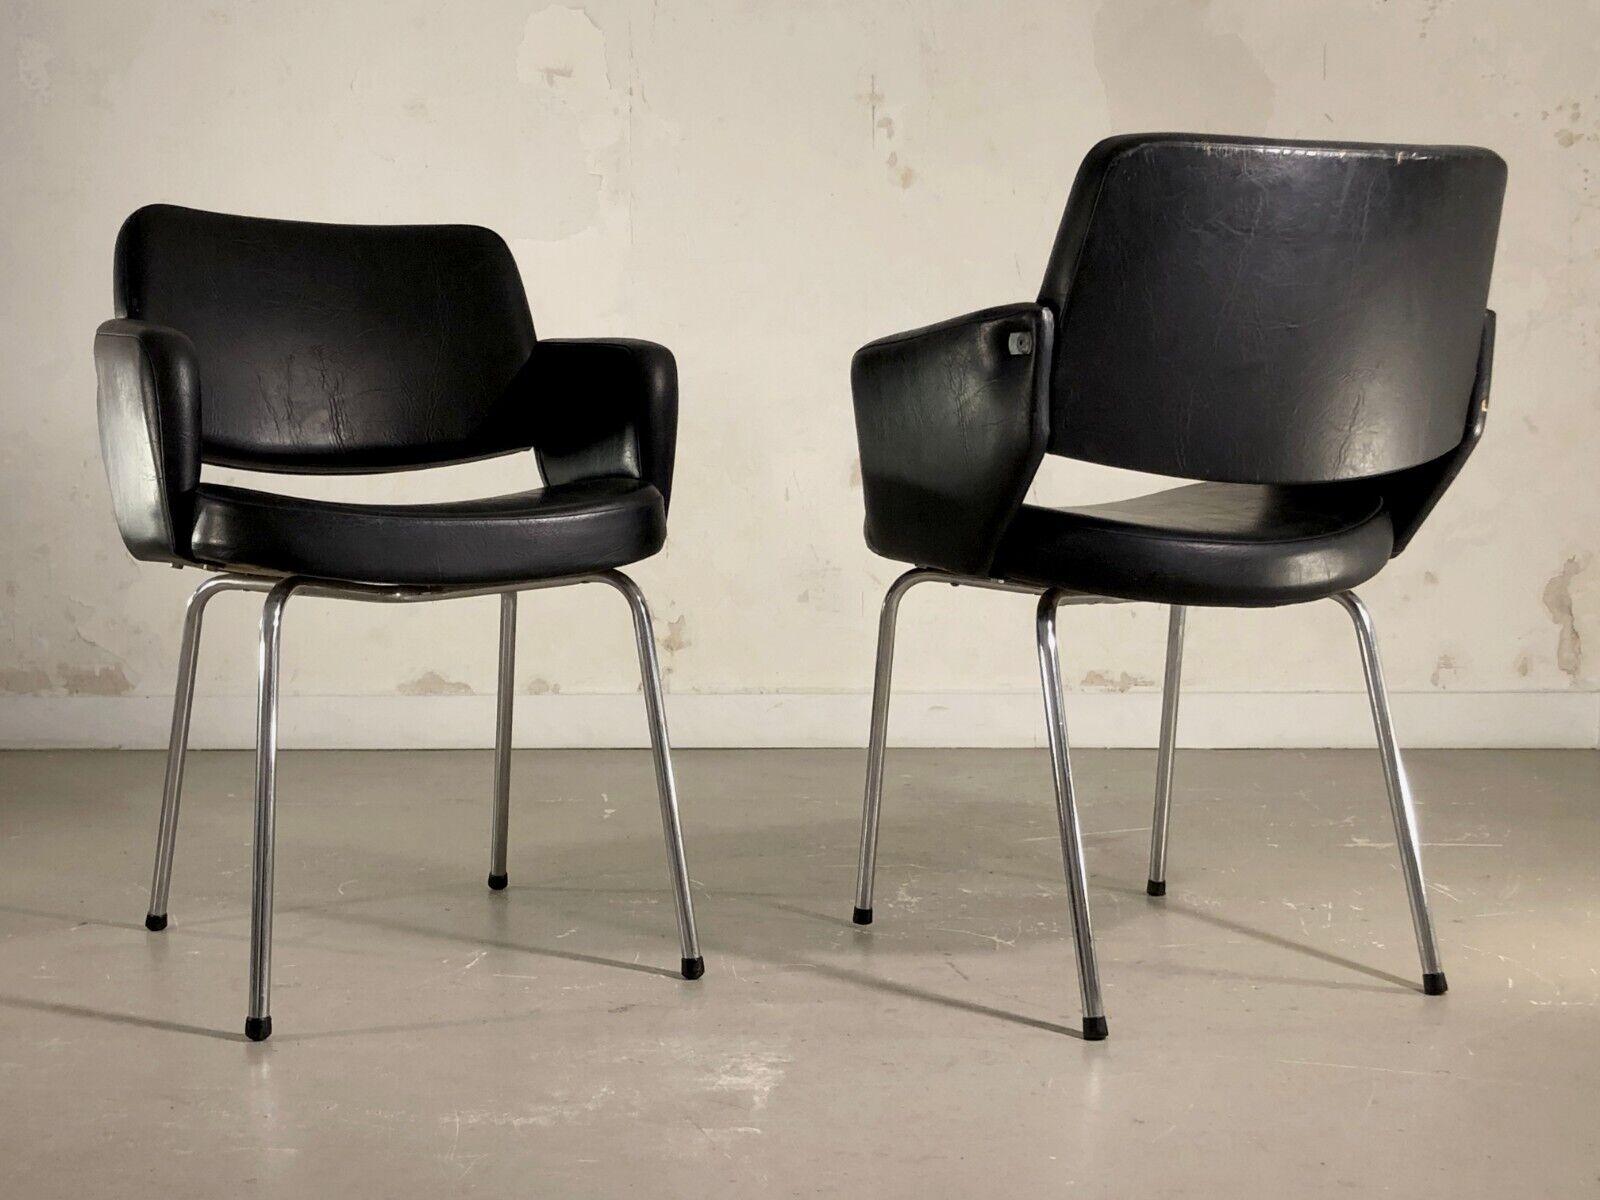 A Pair of MID-CENTURY-MODERN CHAIRS in ARP / MOTTE / GUARICHE Style, France 1950 For Sale 9